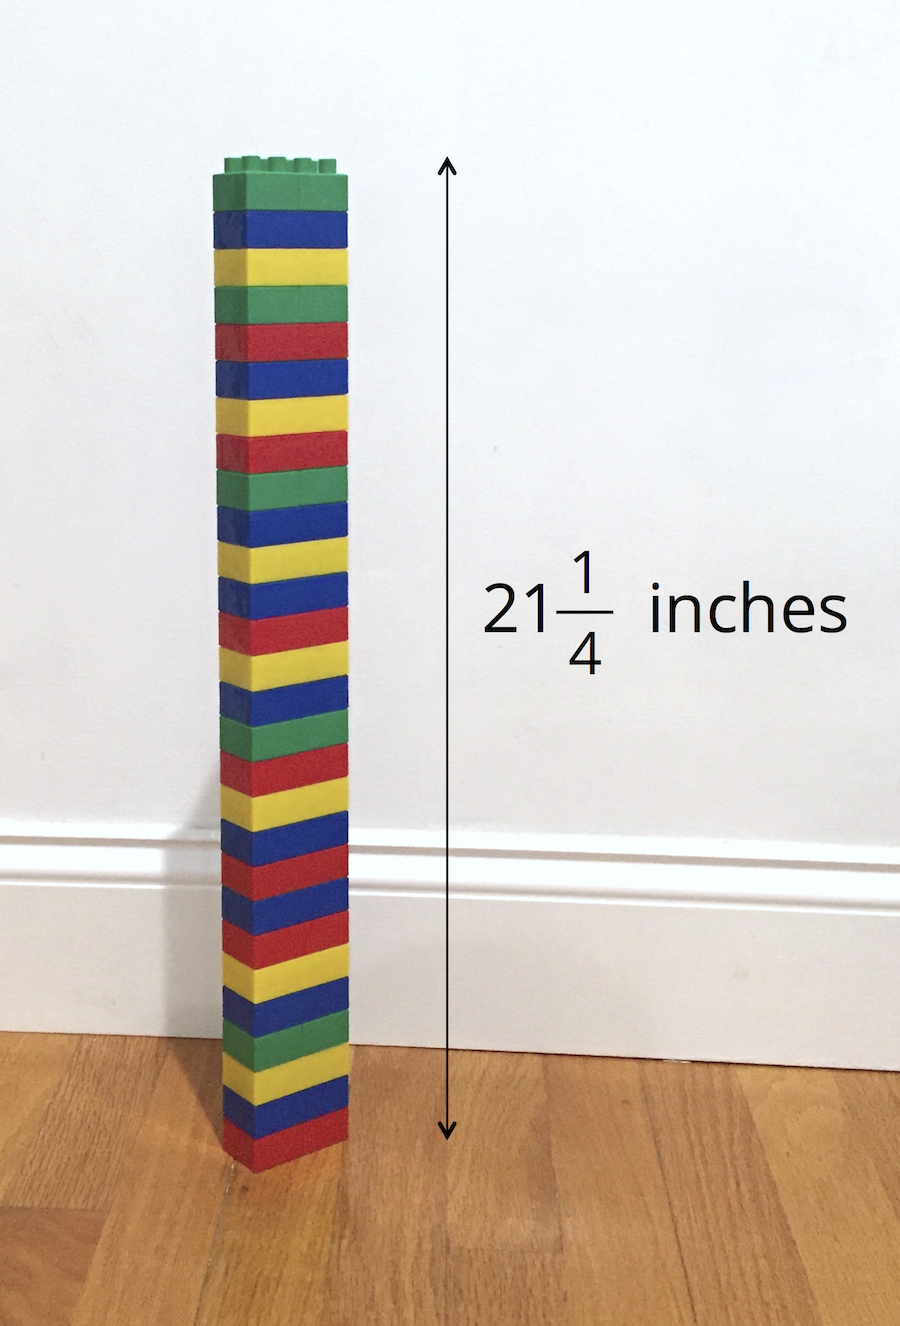 tower of playing bricks 21 and 1 fourth inches high.